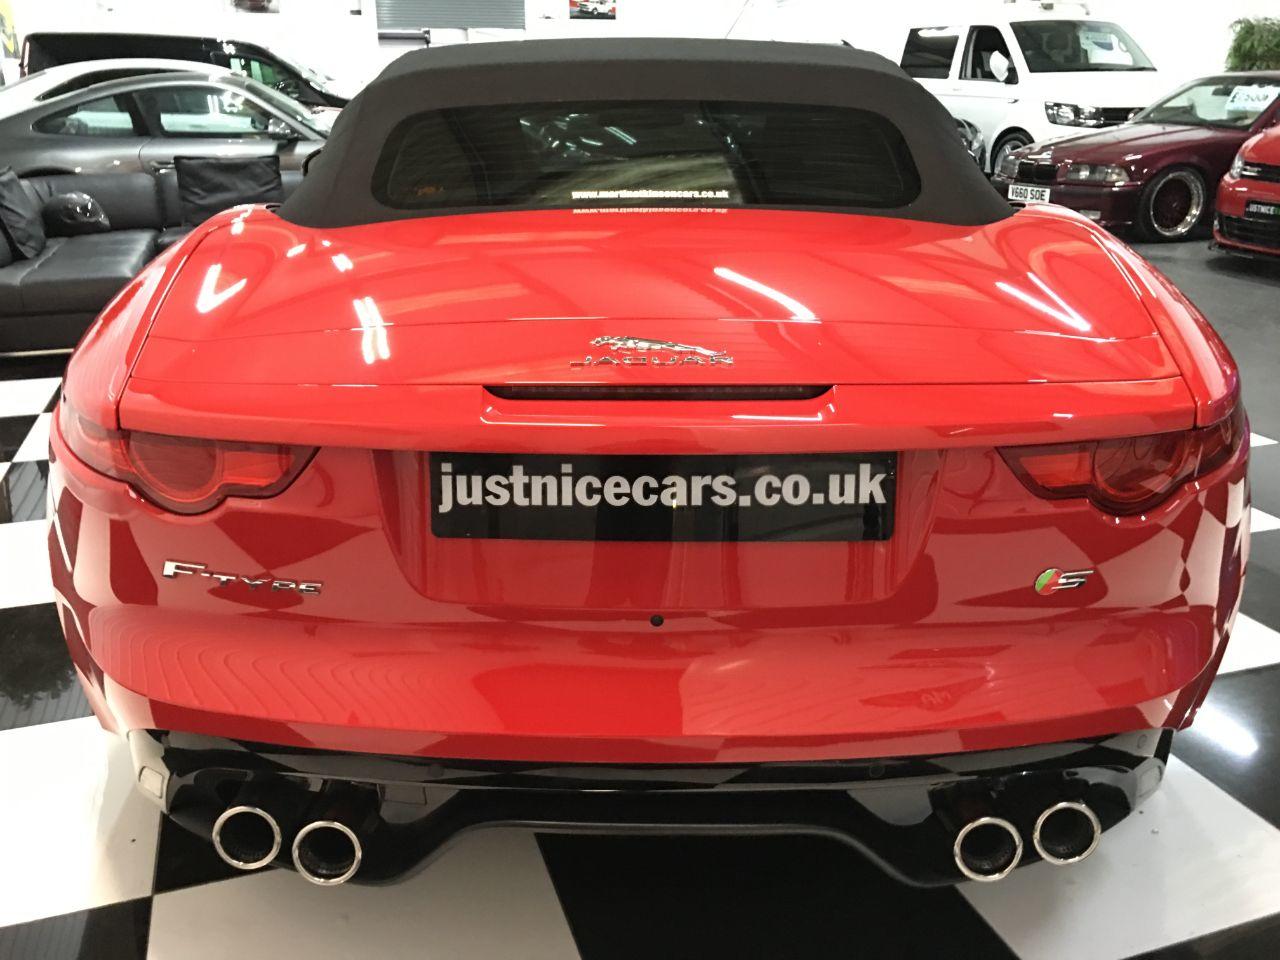 Jaguar F-type 5.0 Supercharged V8 S 2dr Auto Convertible Petrol Salsa Red